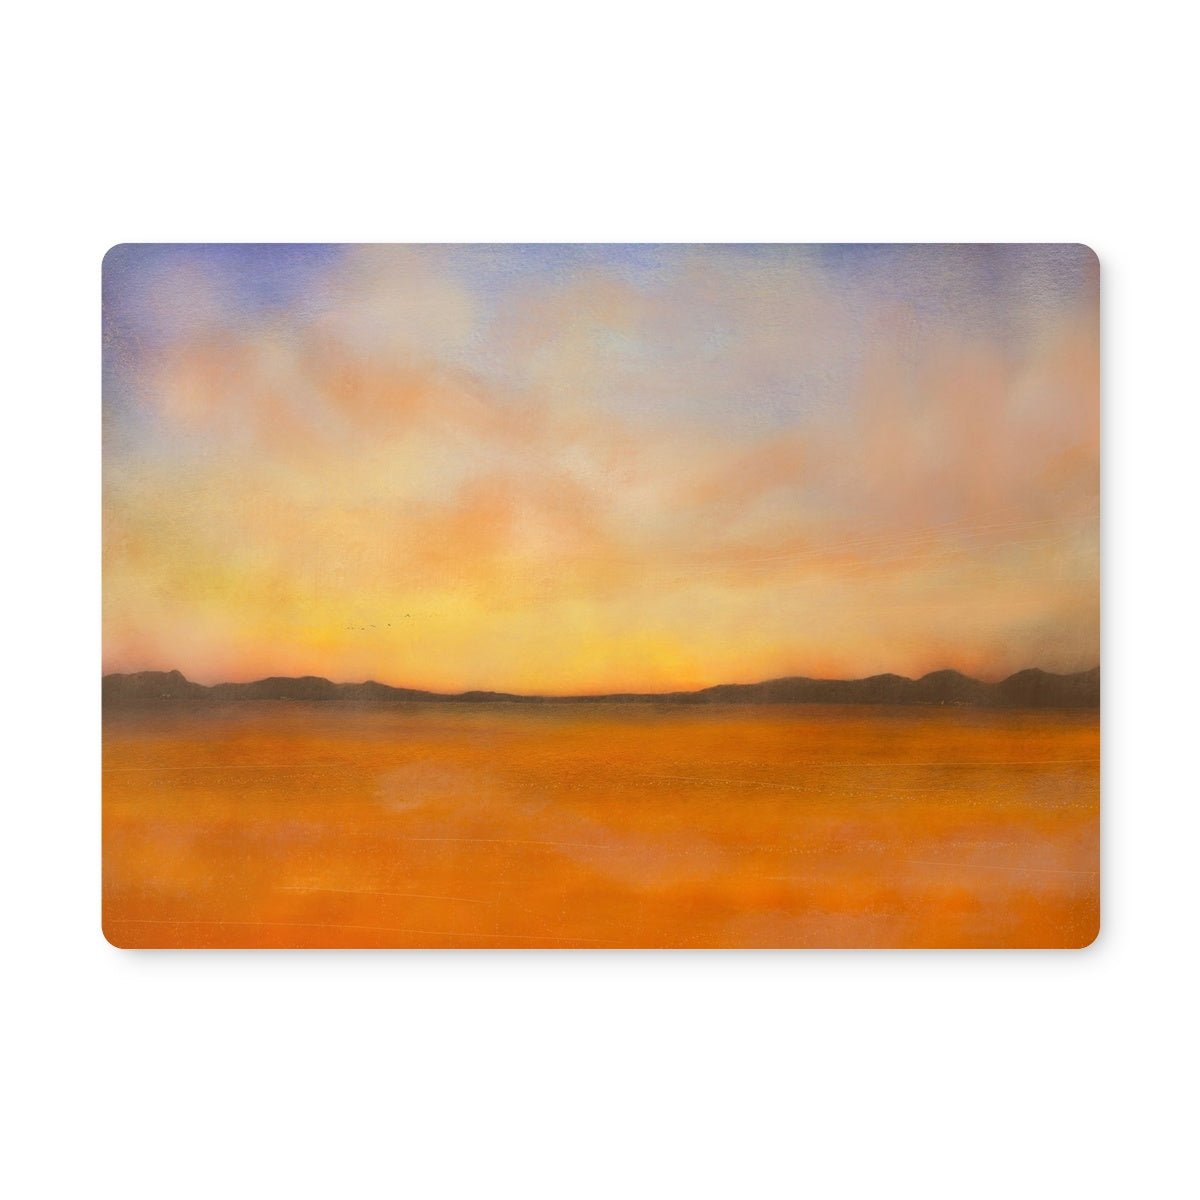 Islay Dawn Art Gifts Placemat-Placemats-Hebridean Islands Art Gallery-4 Placemats-Paintings, Prints, Homeware, Art Gifts From Scotland By Scottish Artist Kevin Hunter